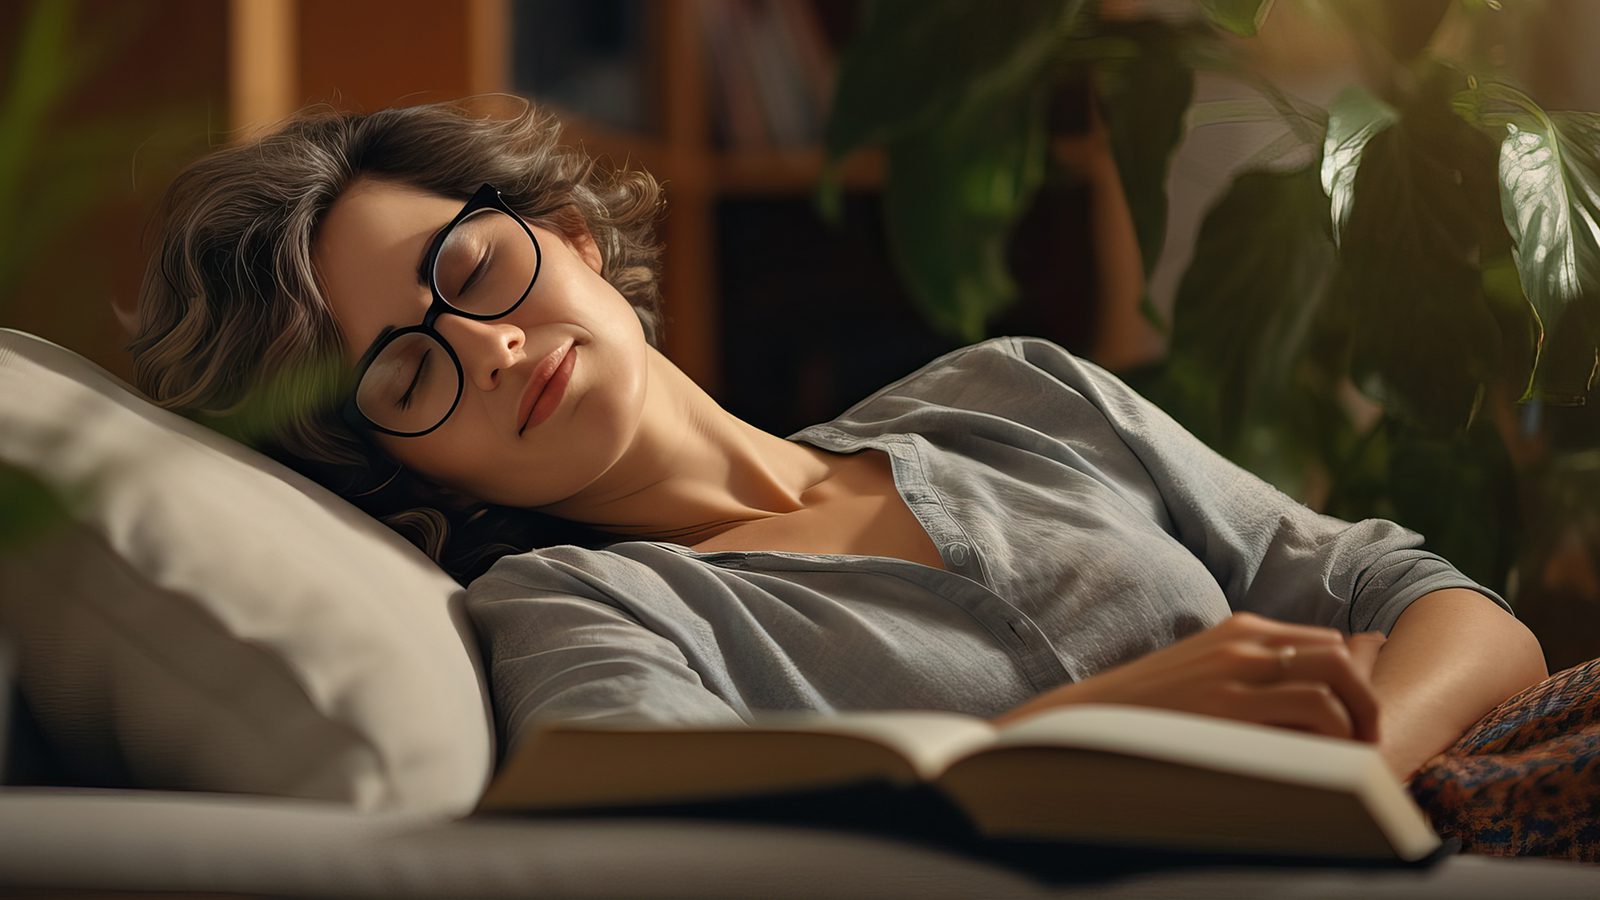 Science Explains the Benefits of an Afternoon Nap